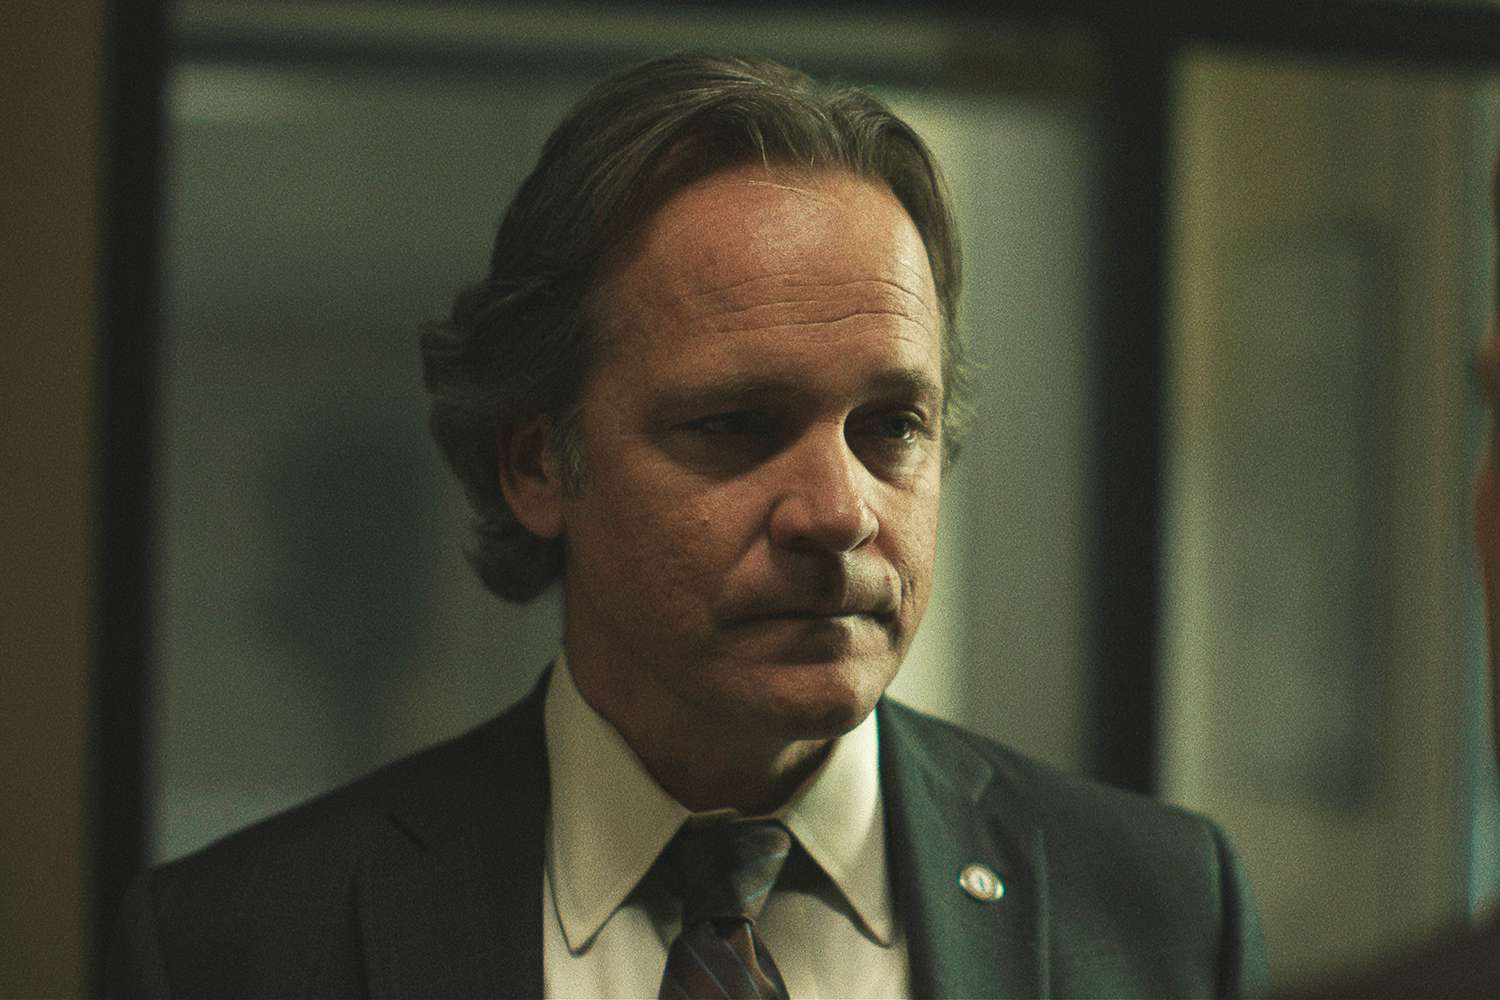 Peter Sarsgaard Confirms He Won't Return for Presumed Innocent Season 2, Says He's 'Not Really Interested in Sequels'